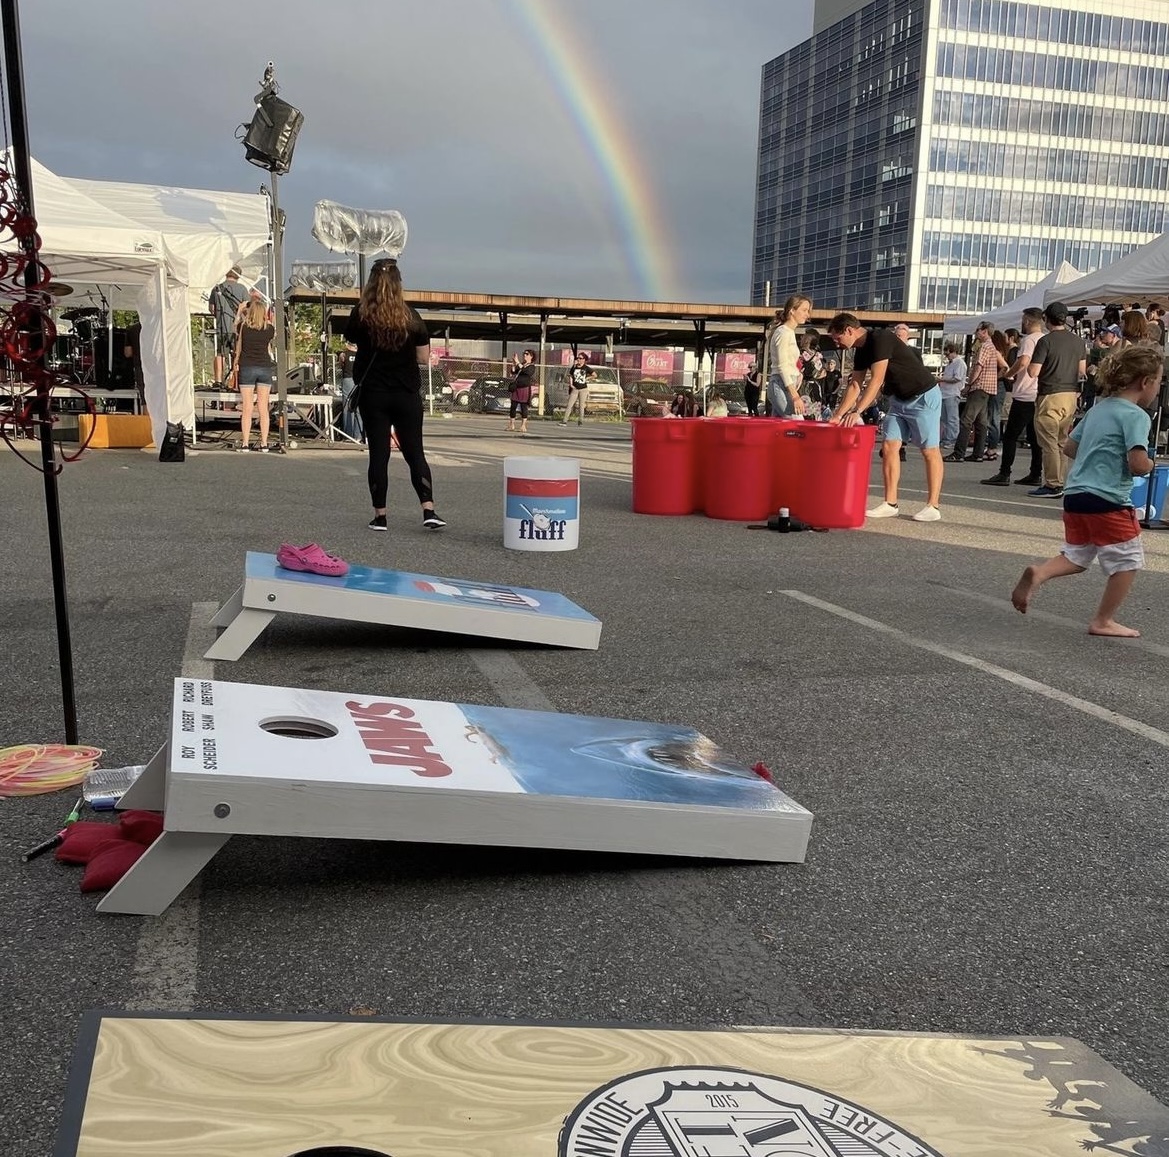 🥳 The #EventThem team is exctied to join #ONCESomerville x #BoyntonYards THIS SATURDAY at the #BlockParty & #OutdoorConcert OF THE SEASON!🕺🎉

🎯 You can expect the full #EventThem games package - life-size Connect 4, Jenga, cornhole & more! 😍

🔗 eventbrite.com/e/block-party-…